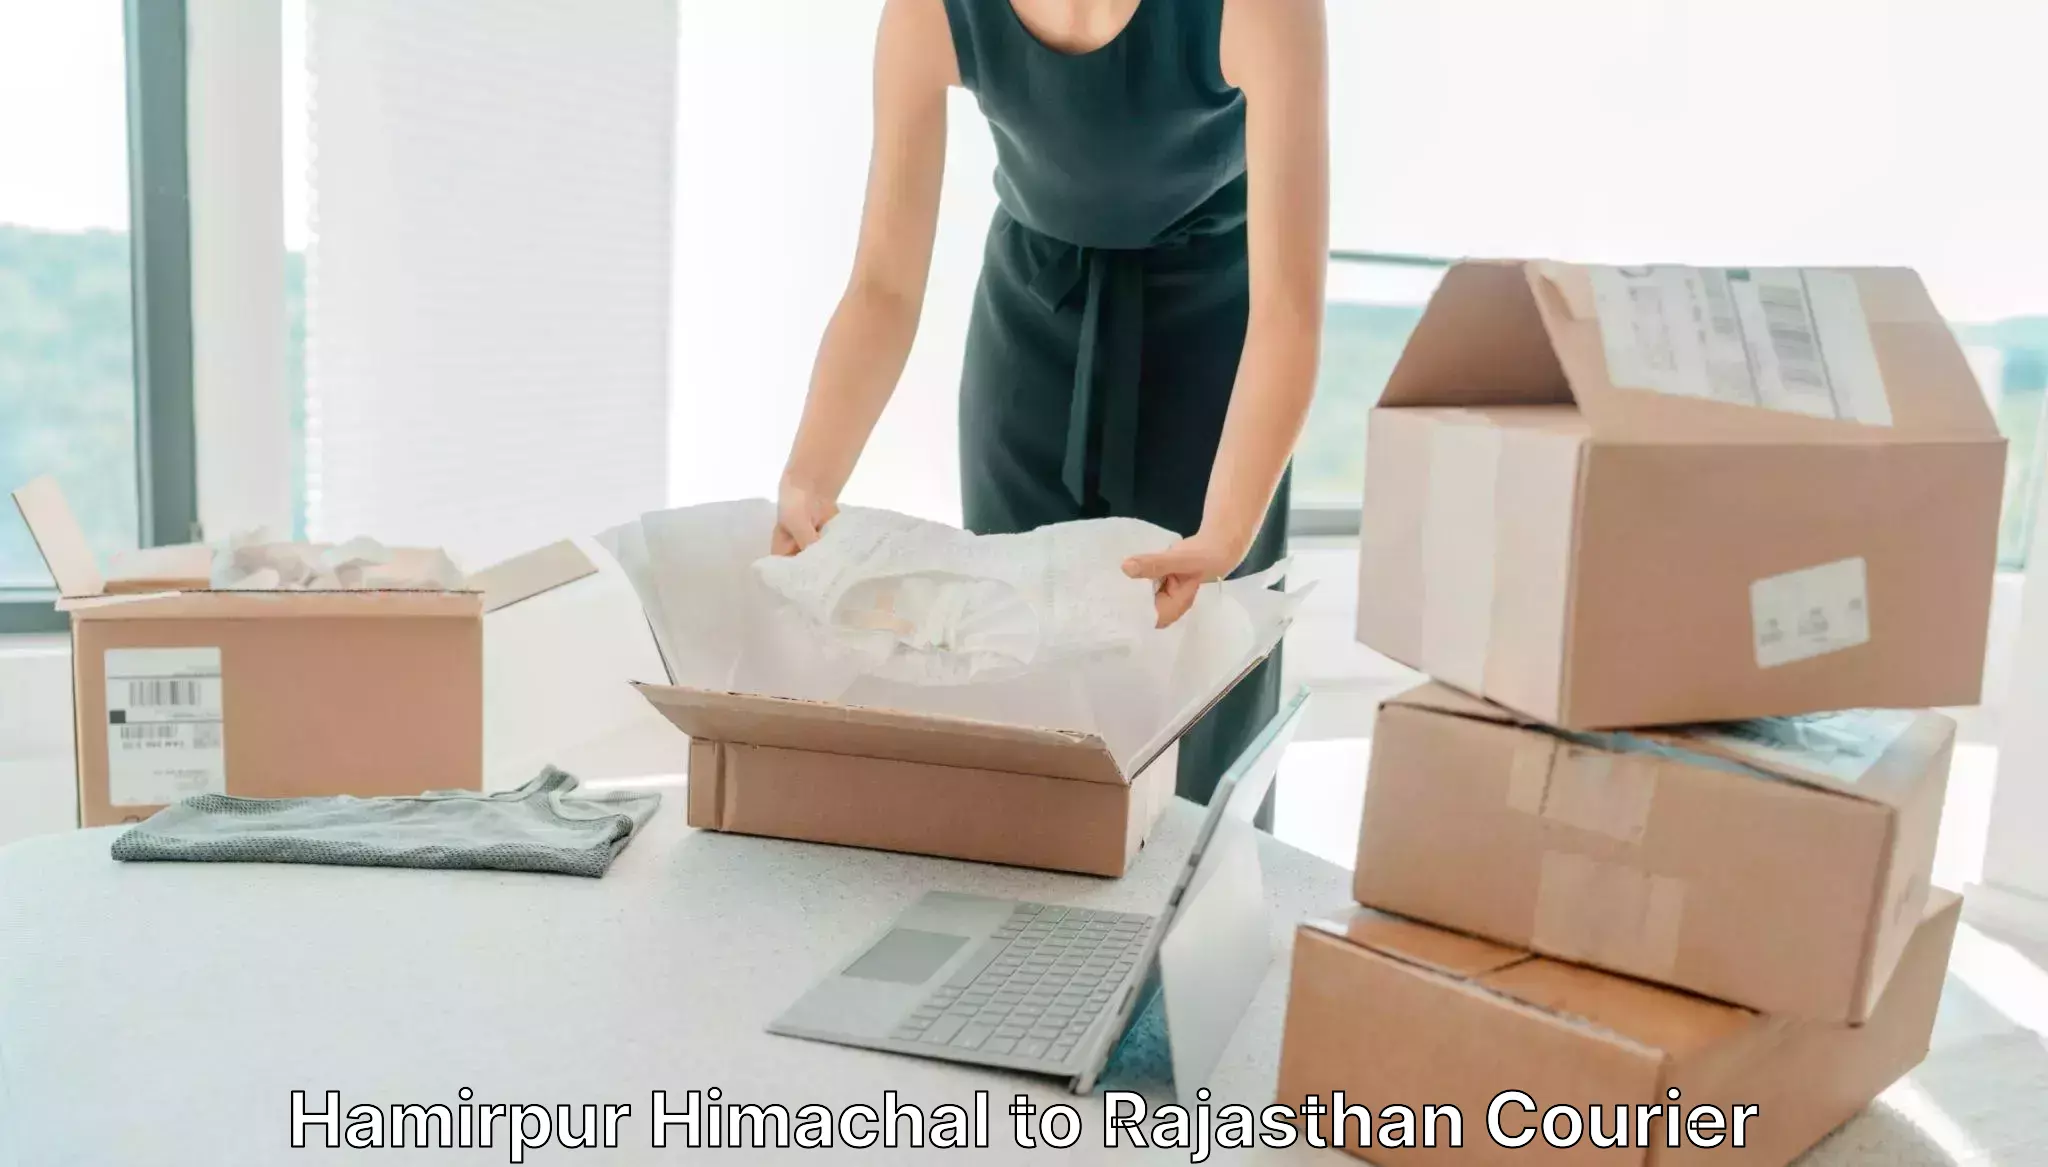 Easy access courier services Hamirpur Himachal to Rajasthan